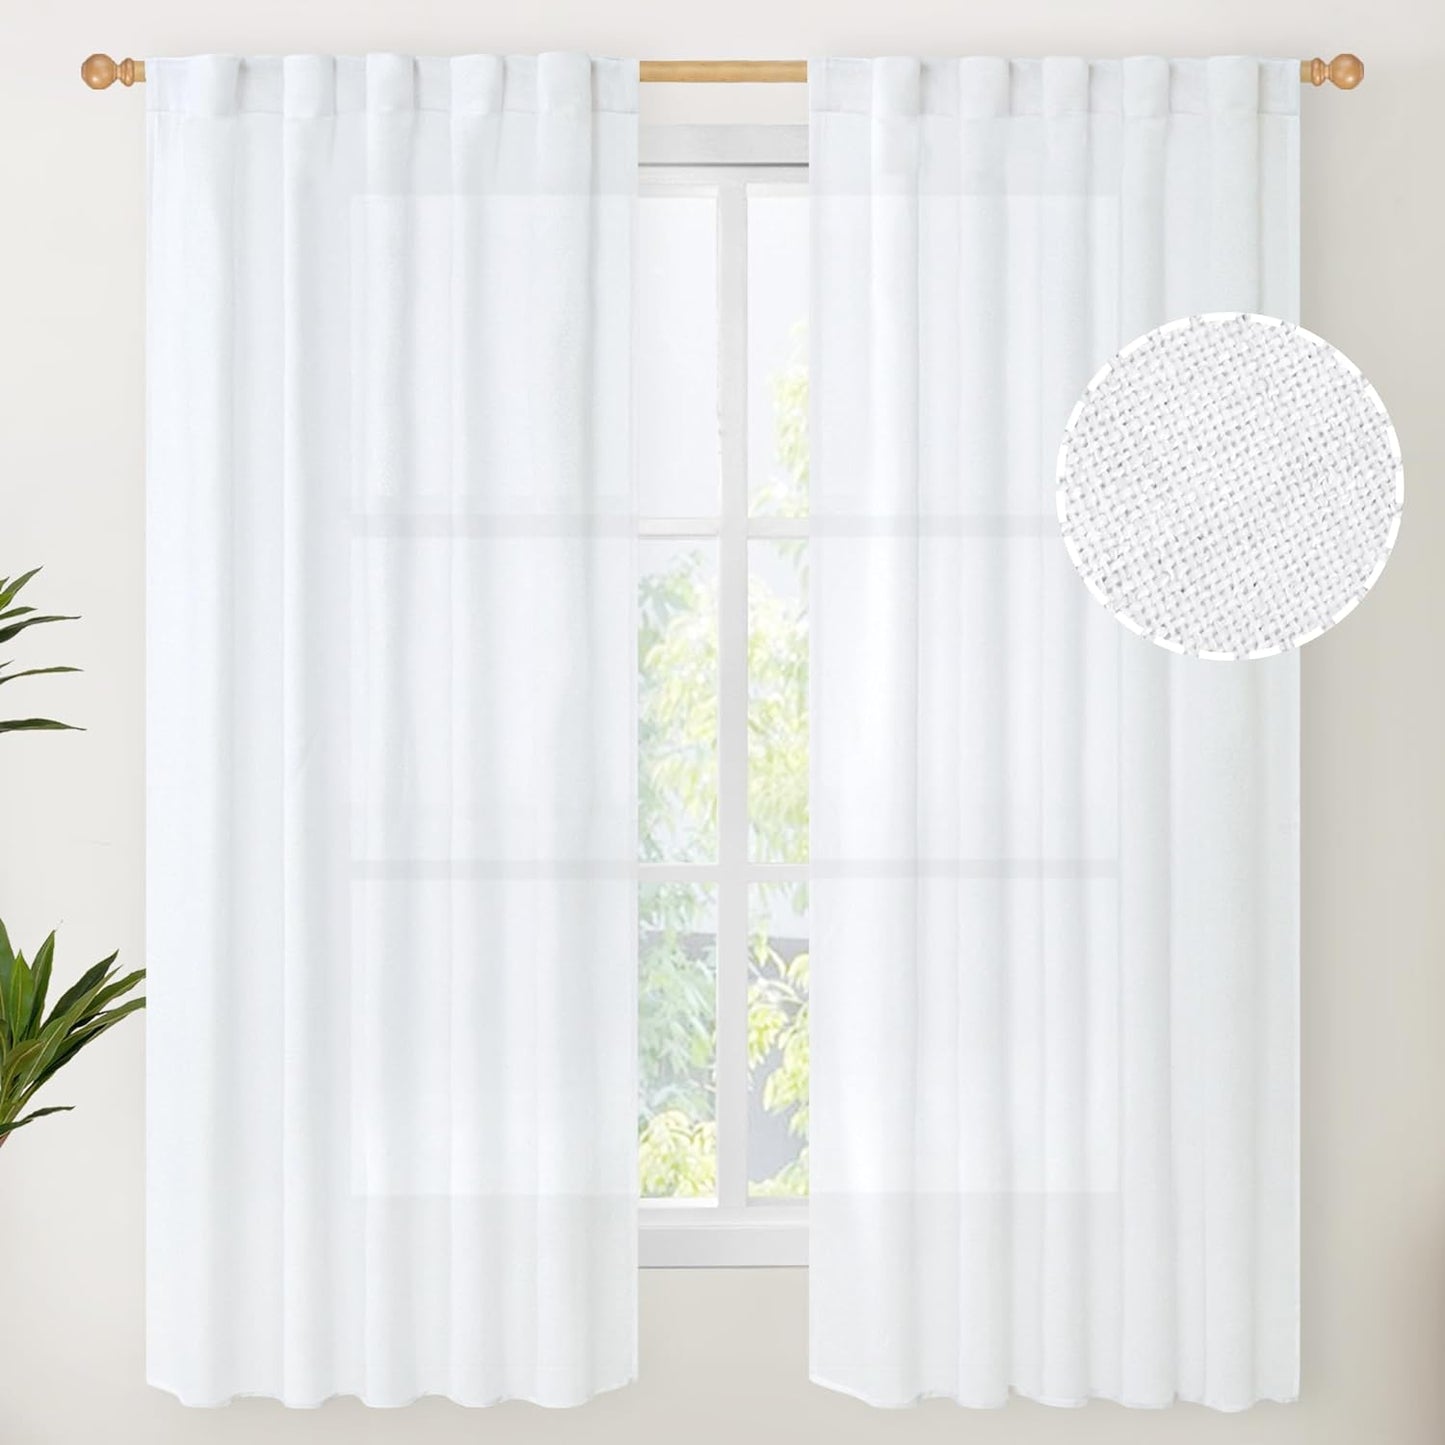 Youngstex Natural Linen Curtains 72 Inch Length 2 Panels for Living Room Light Filtering Textured Window Drapes for Bedroom Dining Office Back Tab Rod Pocket, 52 X 72 Inch  YoungsTex White 38W X 63L 